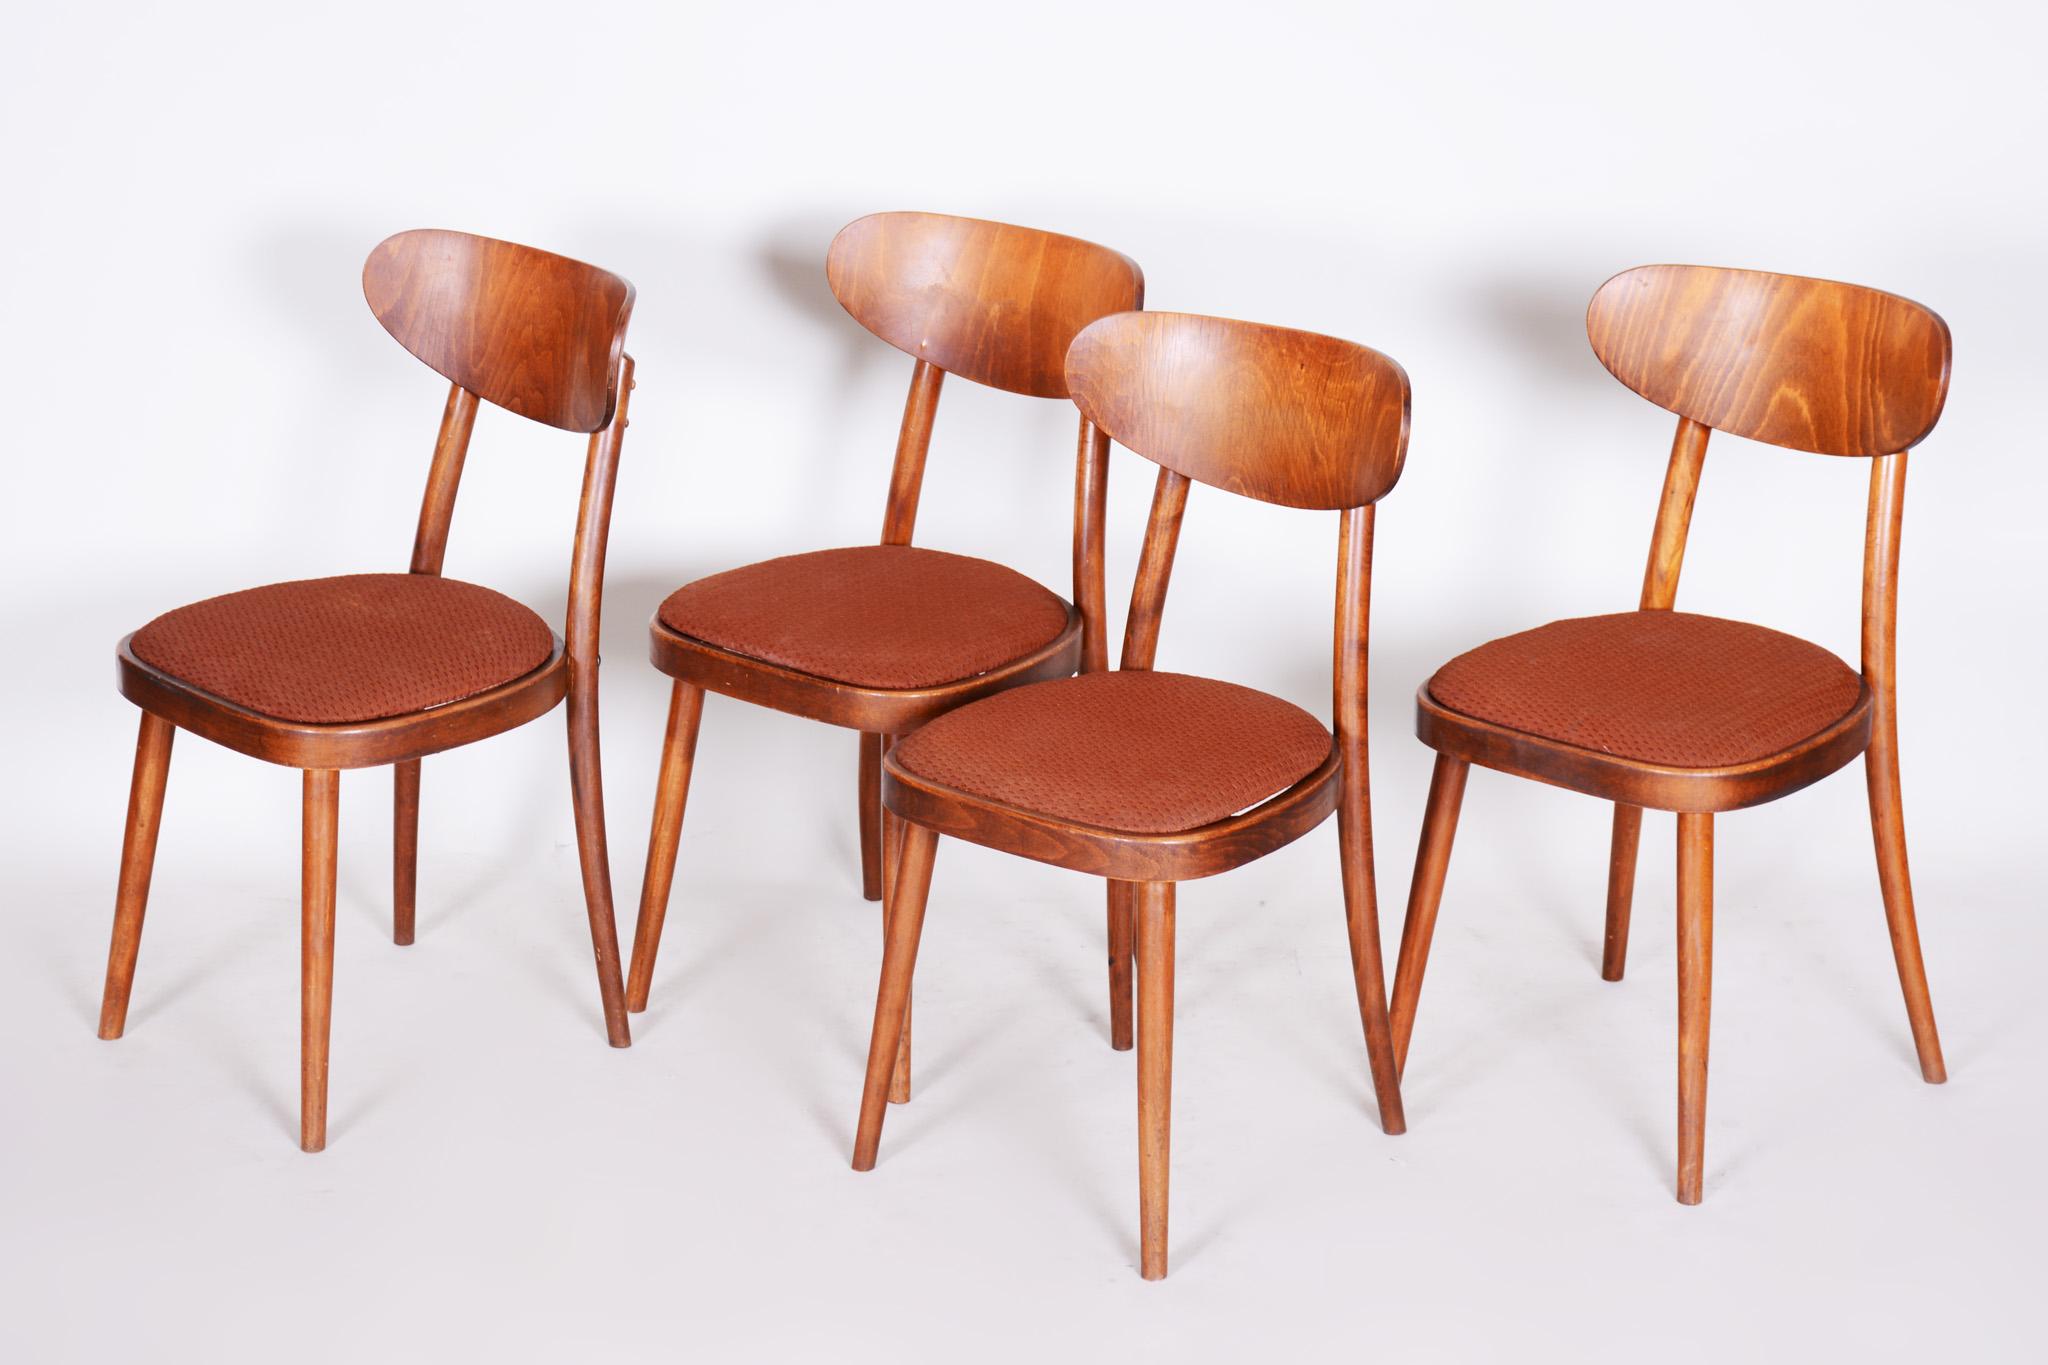 20th Century Czech Brown Beech Midcentury Chairs, 4 Pieces, 1940s, Well Preserved Condition